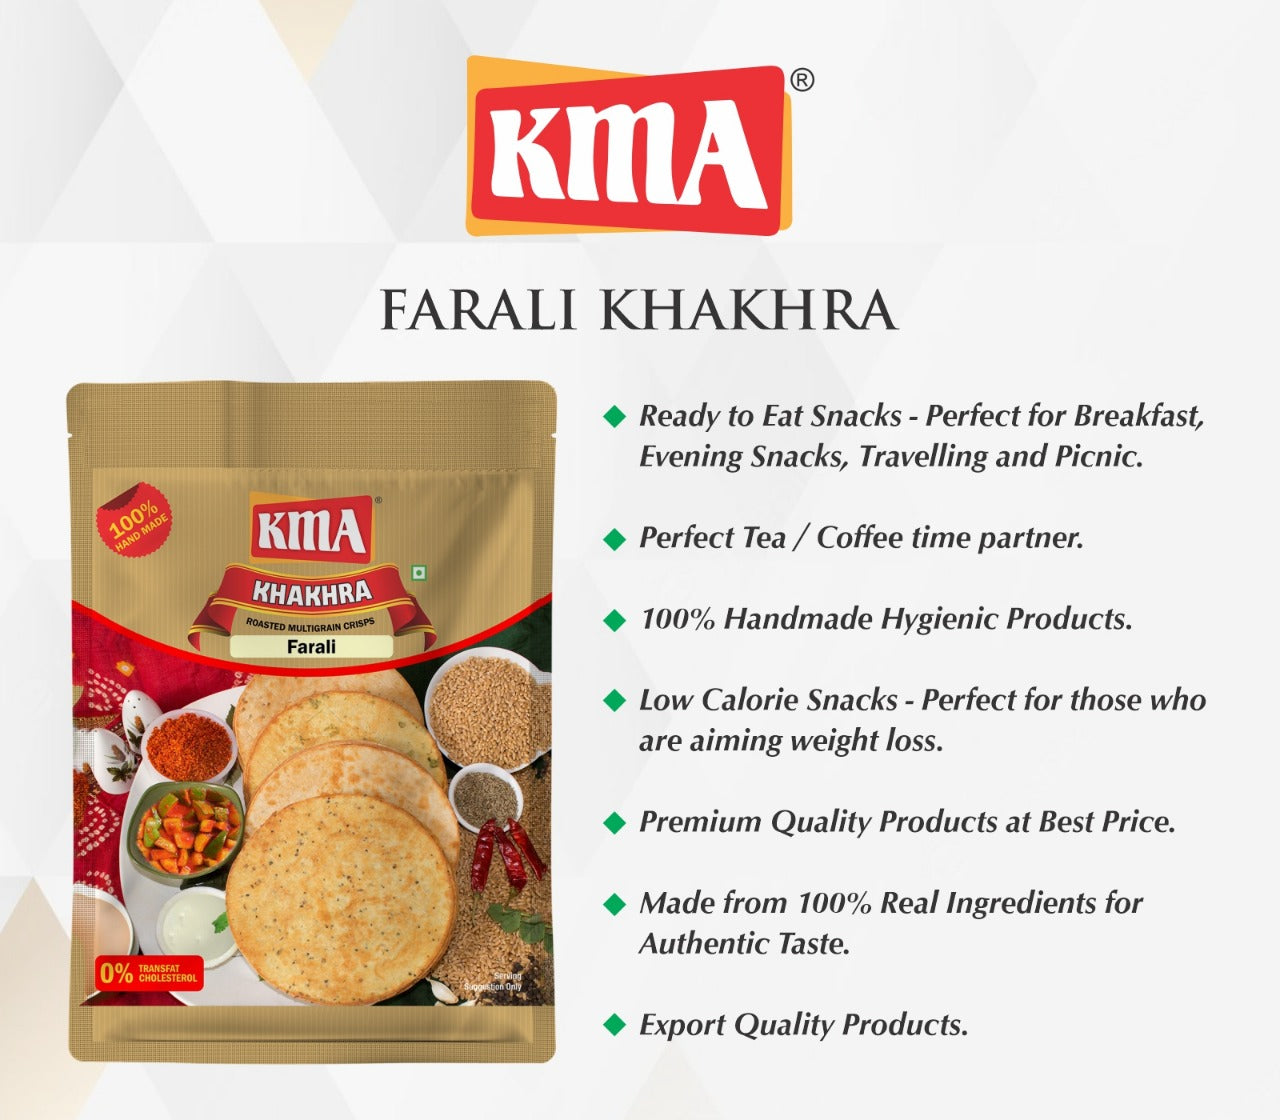 Not only is our Farali Khakhra a great option for fasting, but it is also a low-calorie snack that can be enjoyed on any day. Whether you're taking a break, going on a picnic, working in the office, traveling, watching a movie, dieting, or attending a party, our Khakhra is the perfect companion.